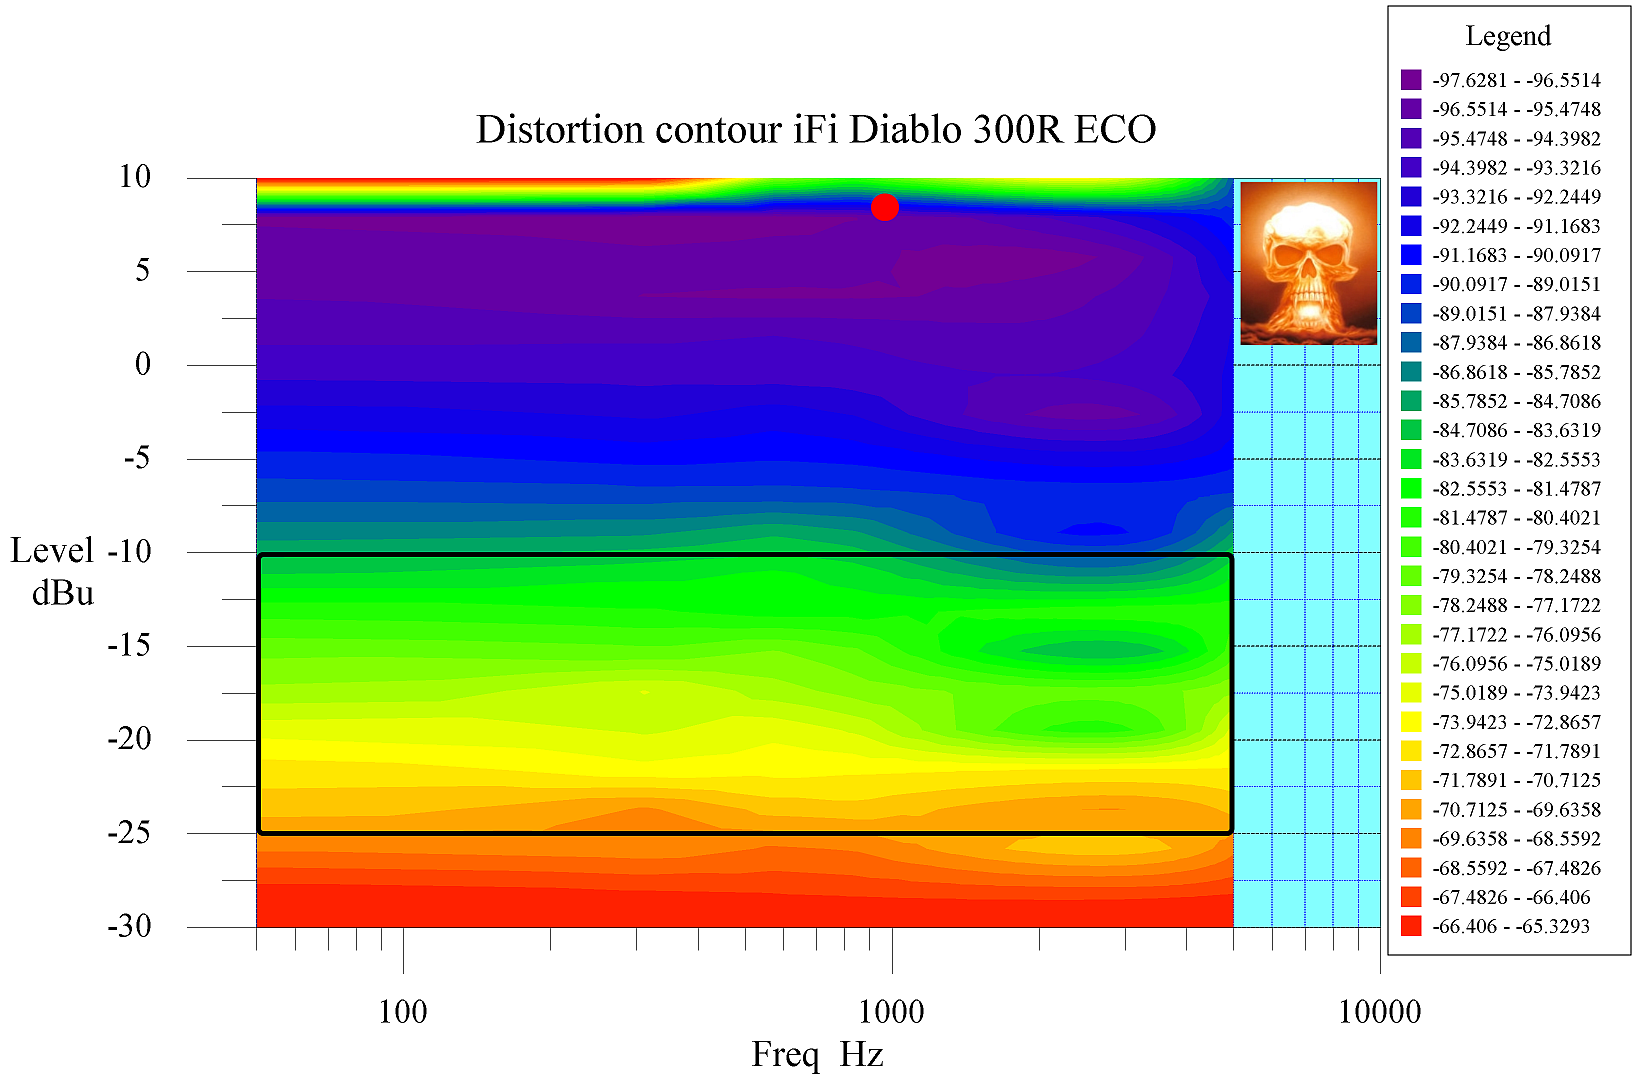 33 Distortion surface iFi Diablo 300R ECO 5 dBu max annotated.png